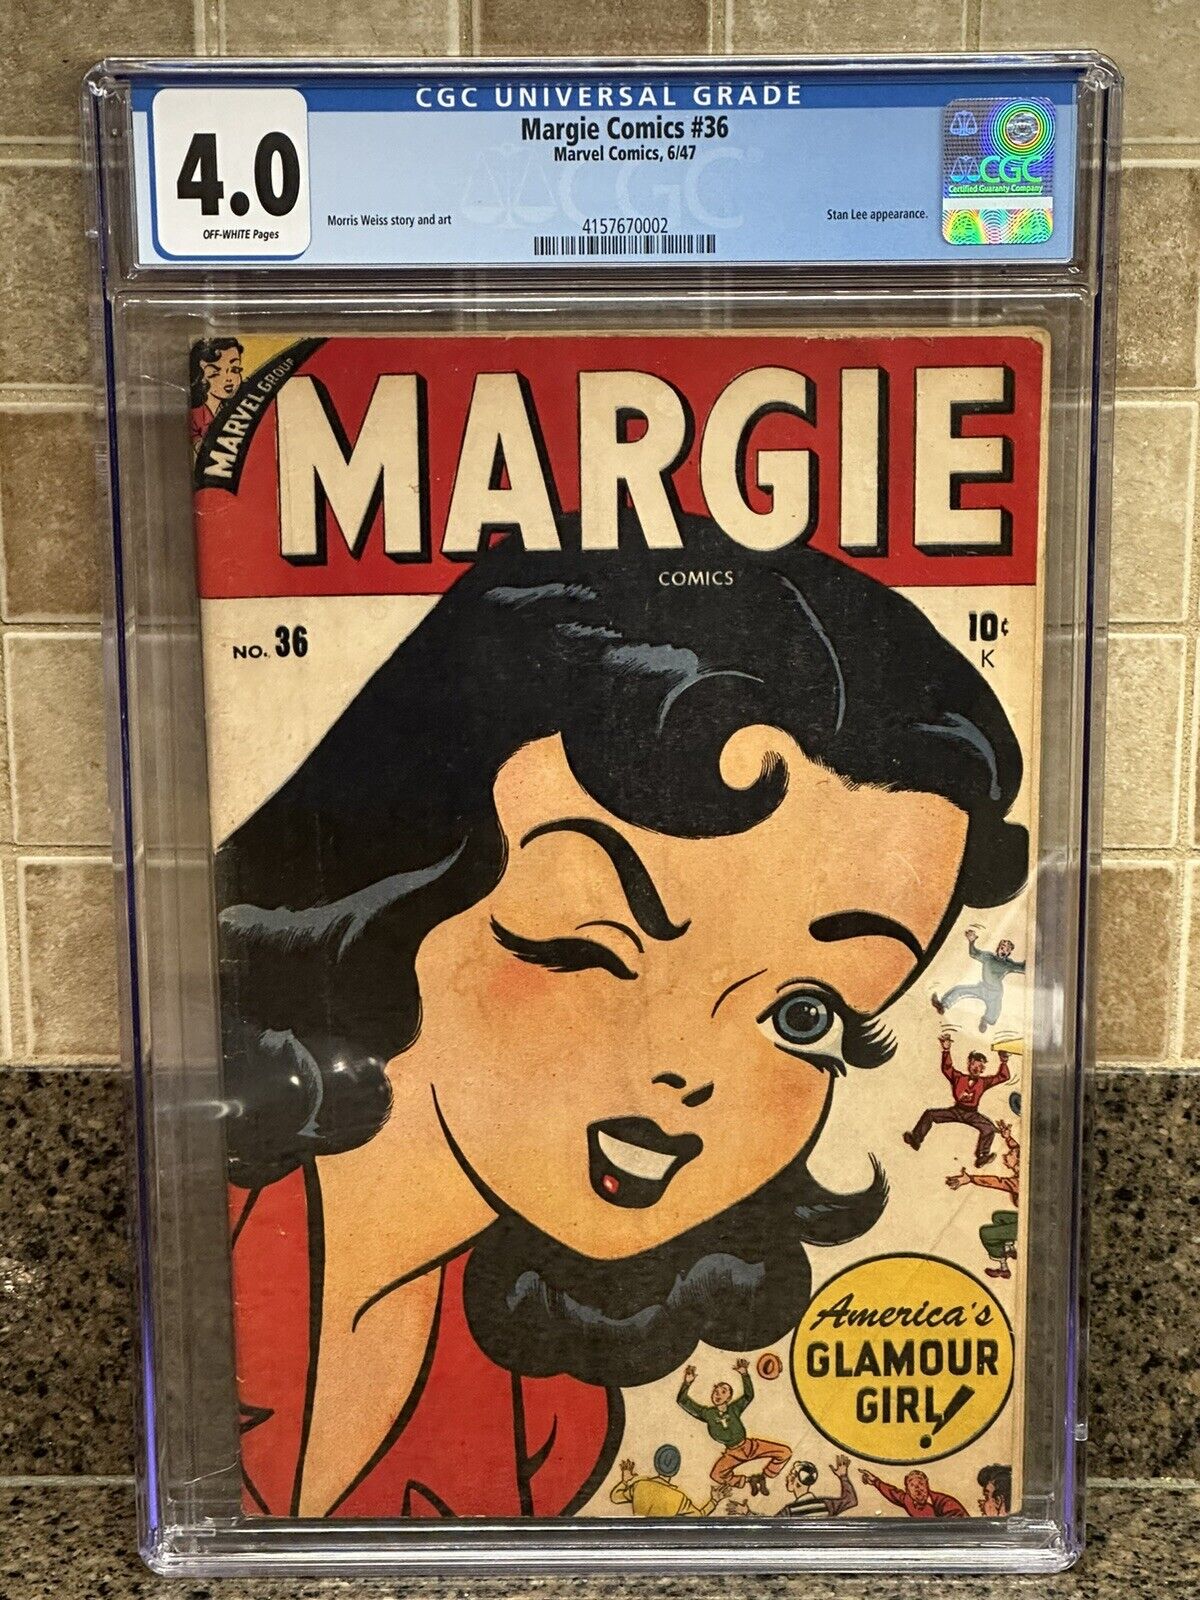 Margie #36 (CGC 4.0) Rare Stan Lee Panel (Early comic cameo) Golden Age Timely